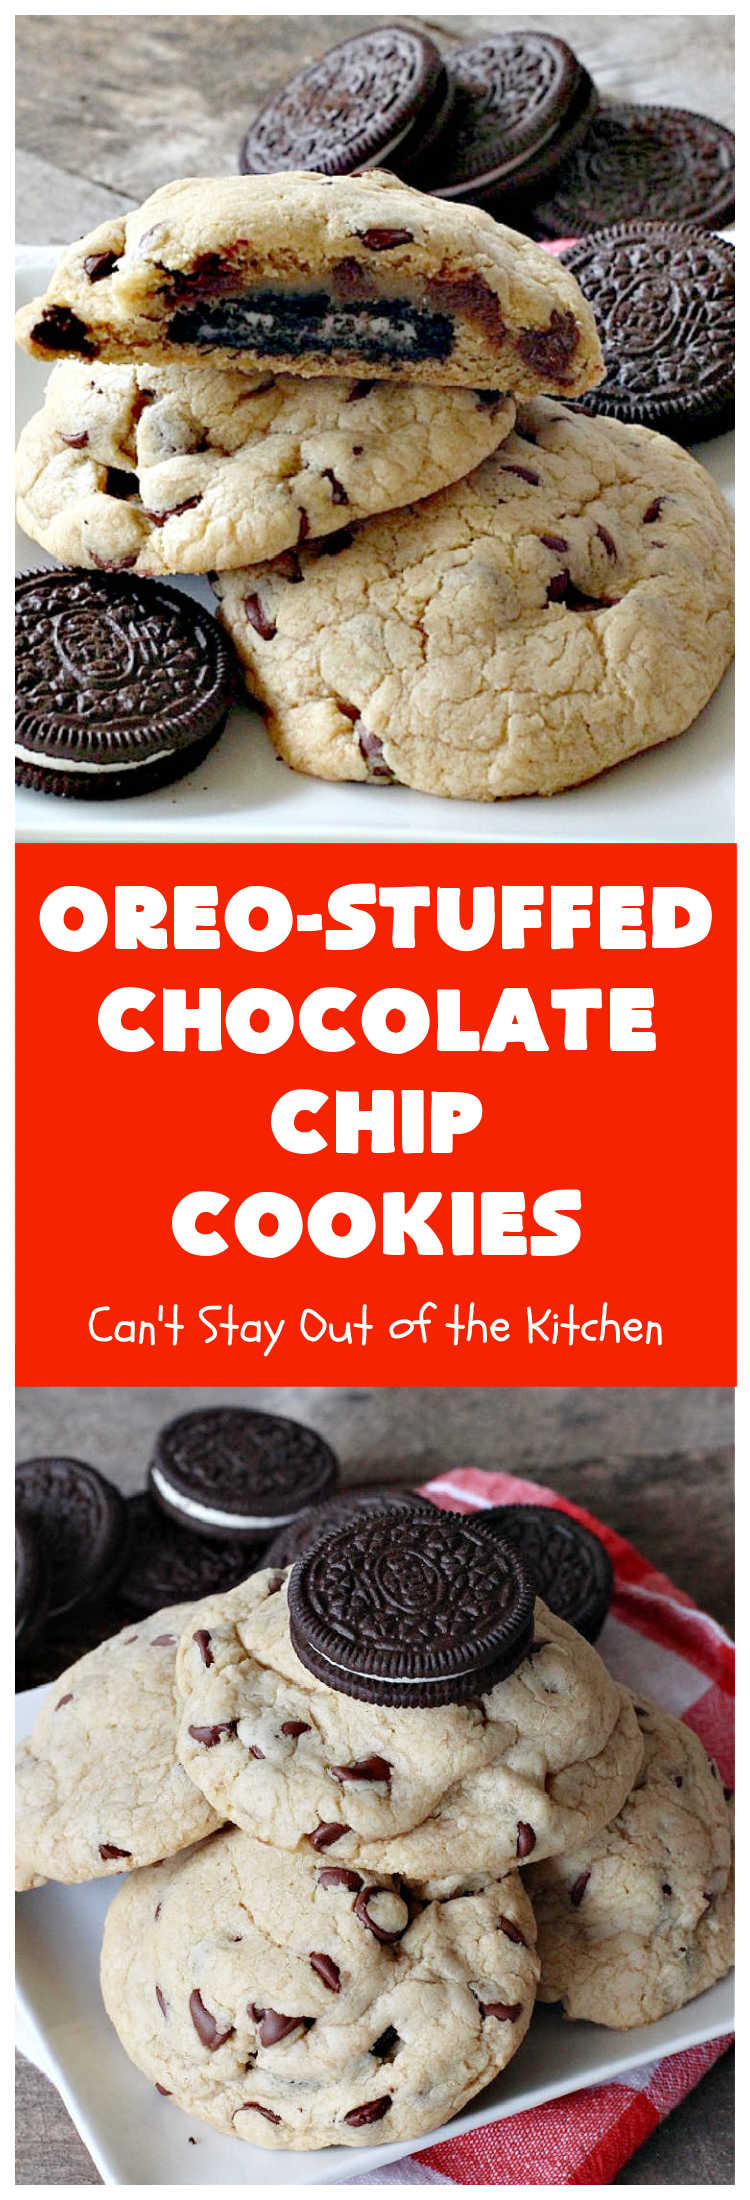 Oreo-Stuffed Chocolate Chip Cookies | Can't Stay Out of the Kitchen